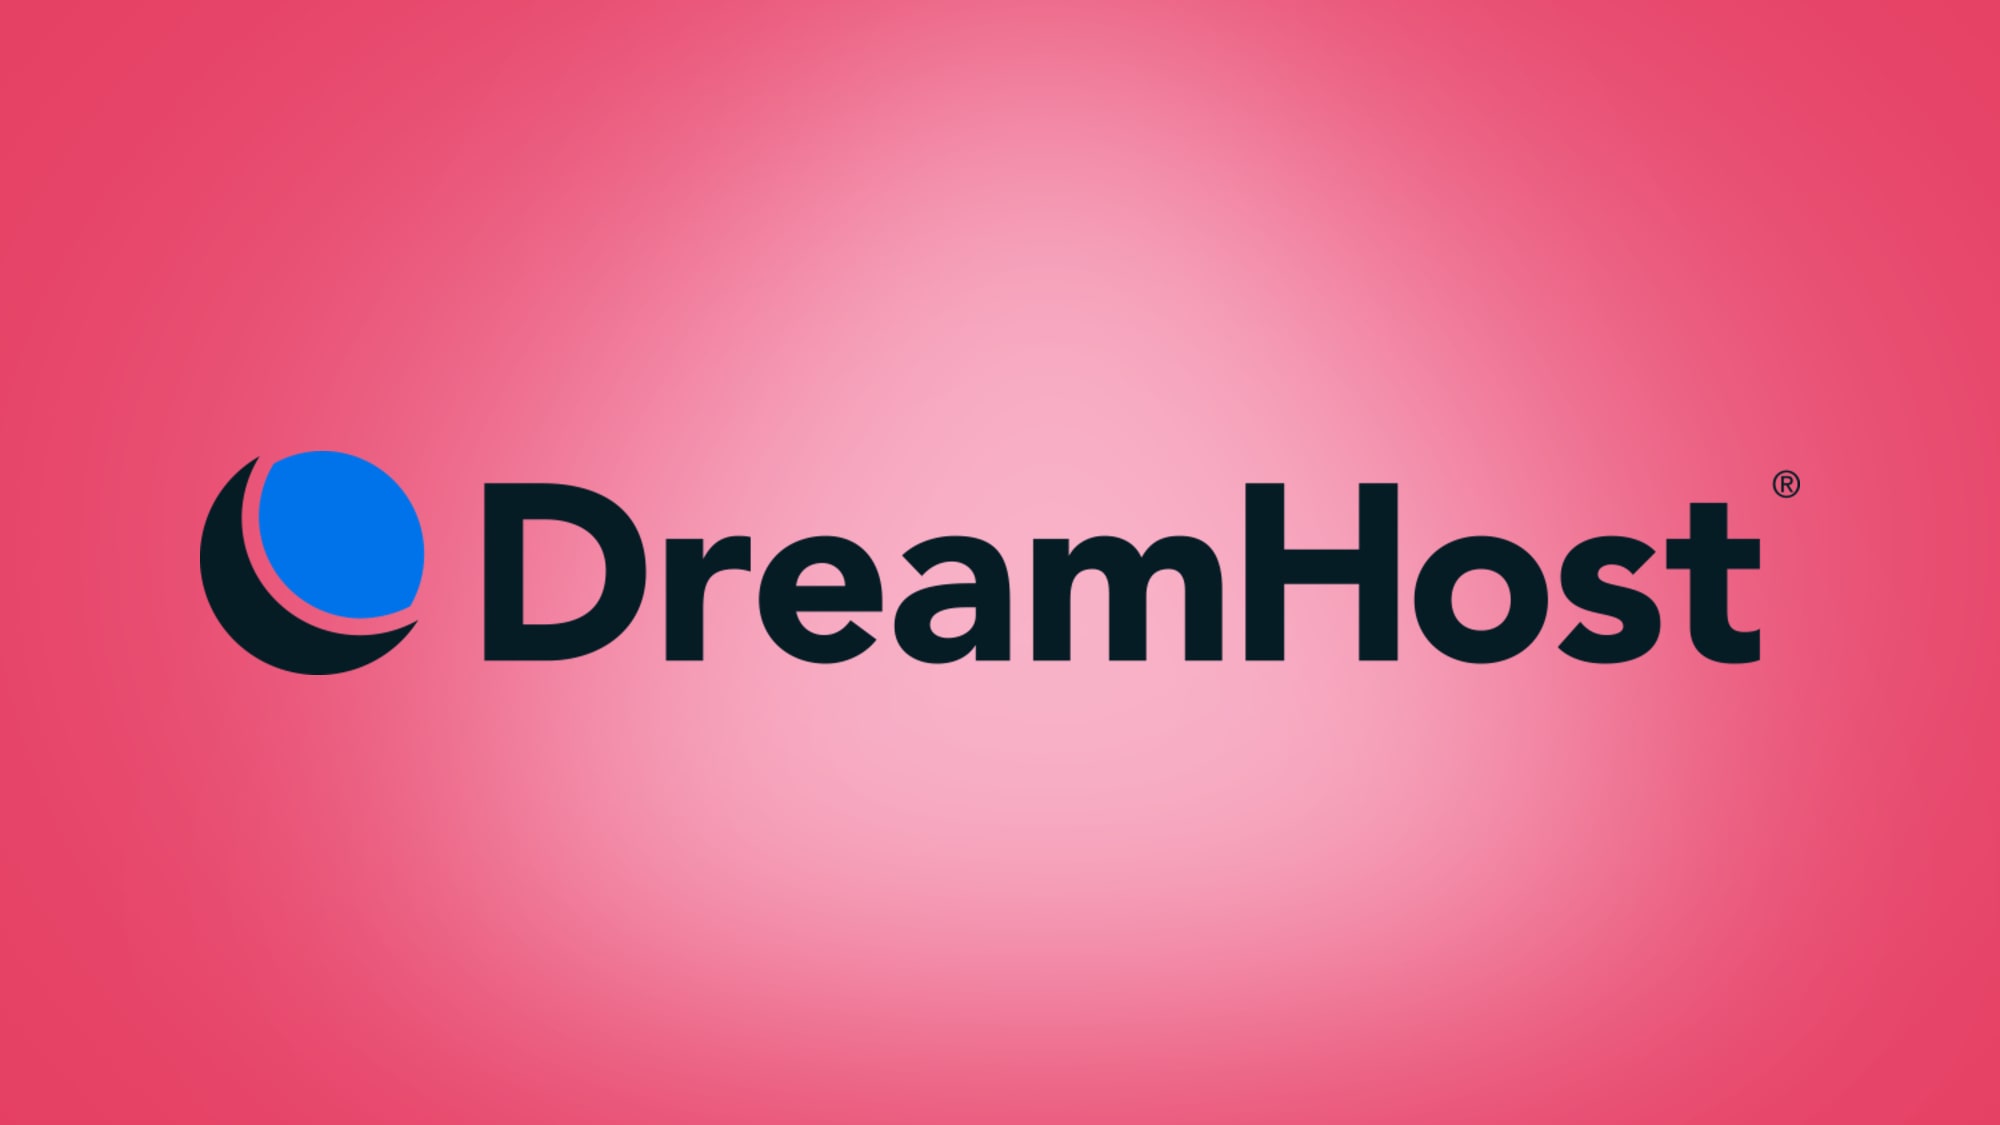 DreamHost logo on pink background with spotlight effect